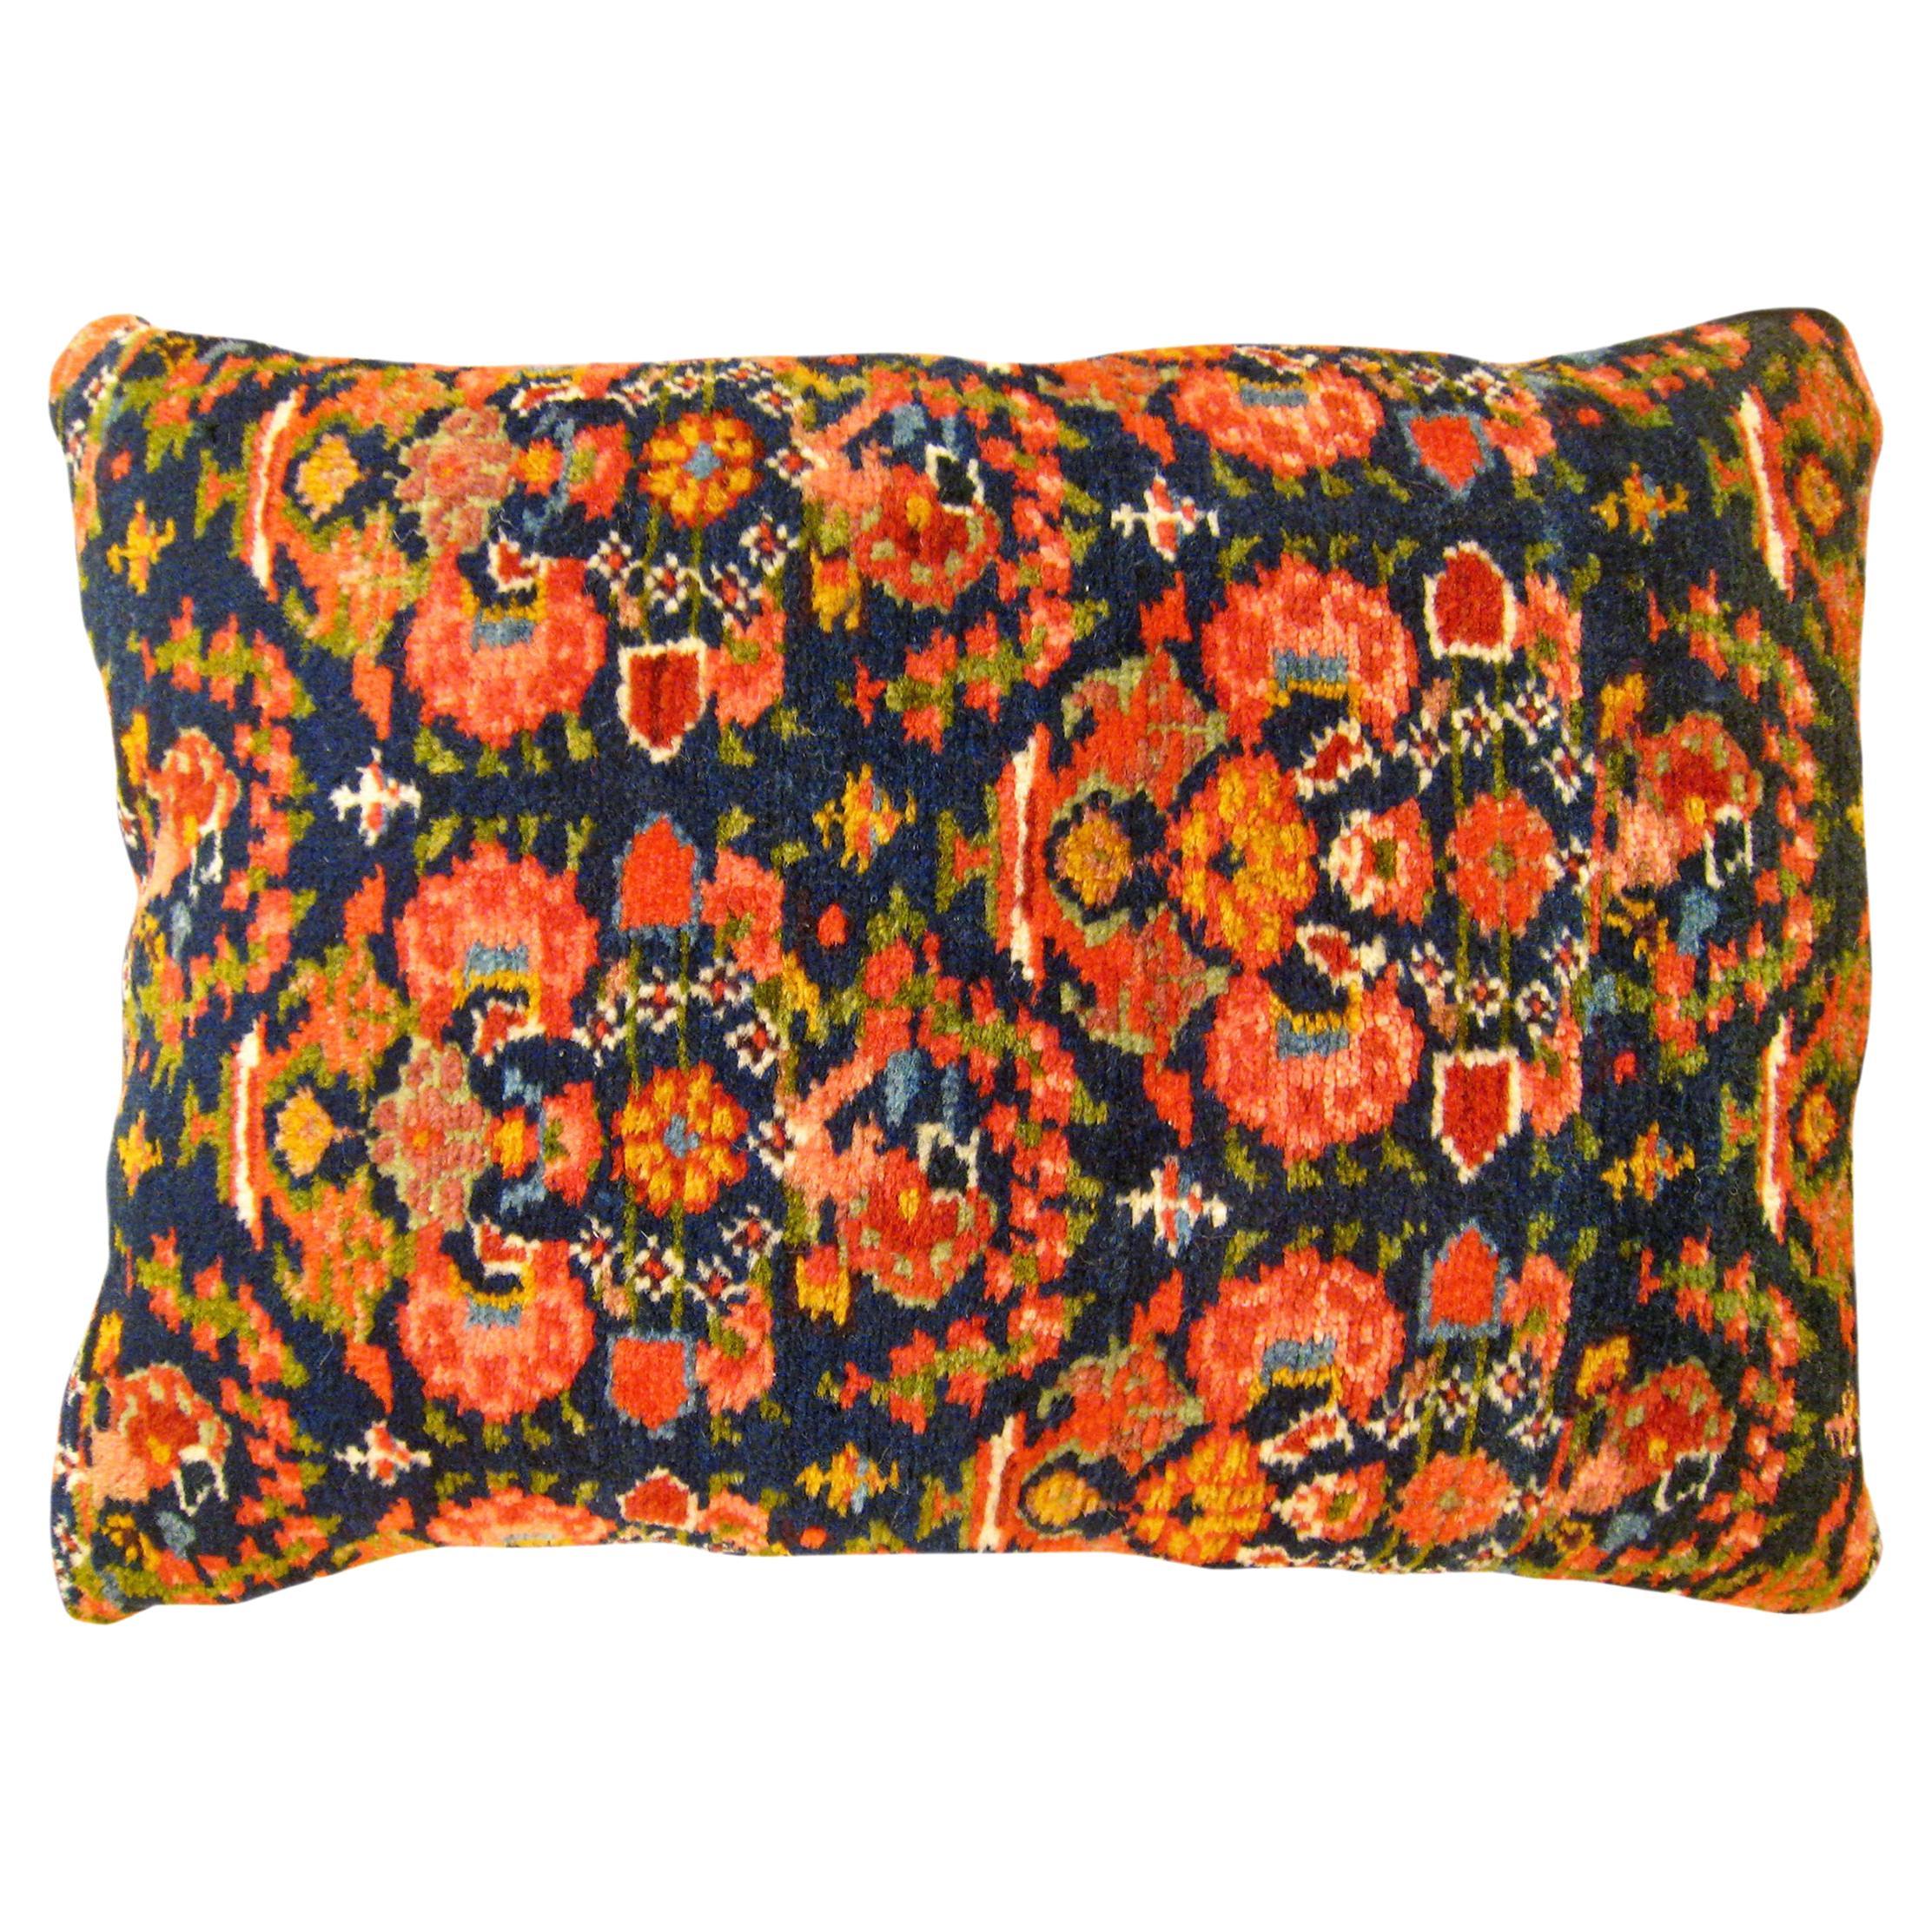 Decorative Antique Persian Malayer Carpet Pillow with Geometric Abstracts Design For Sale